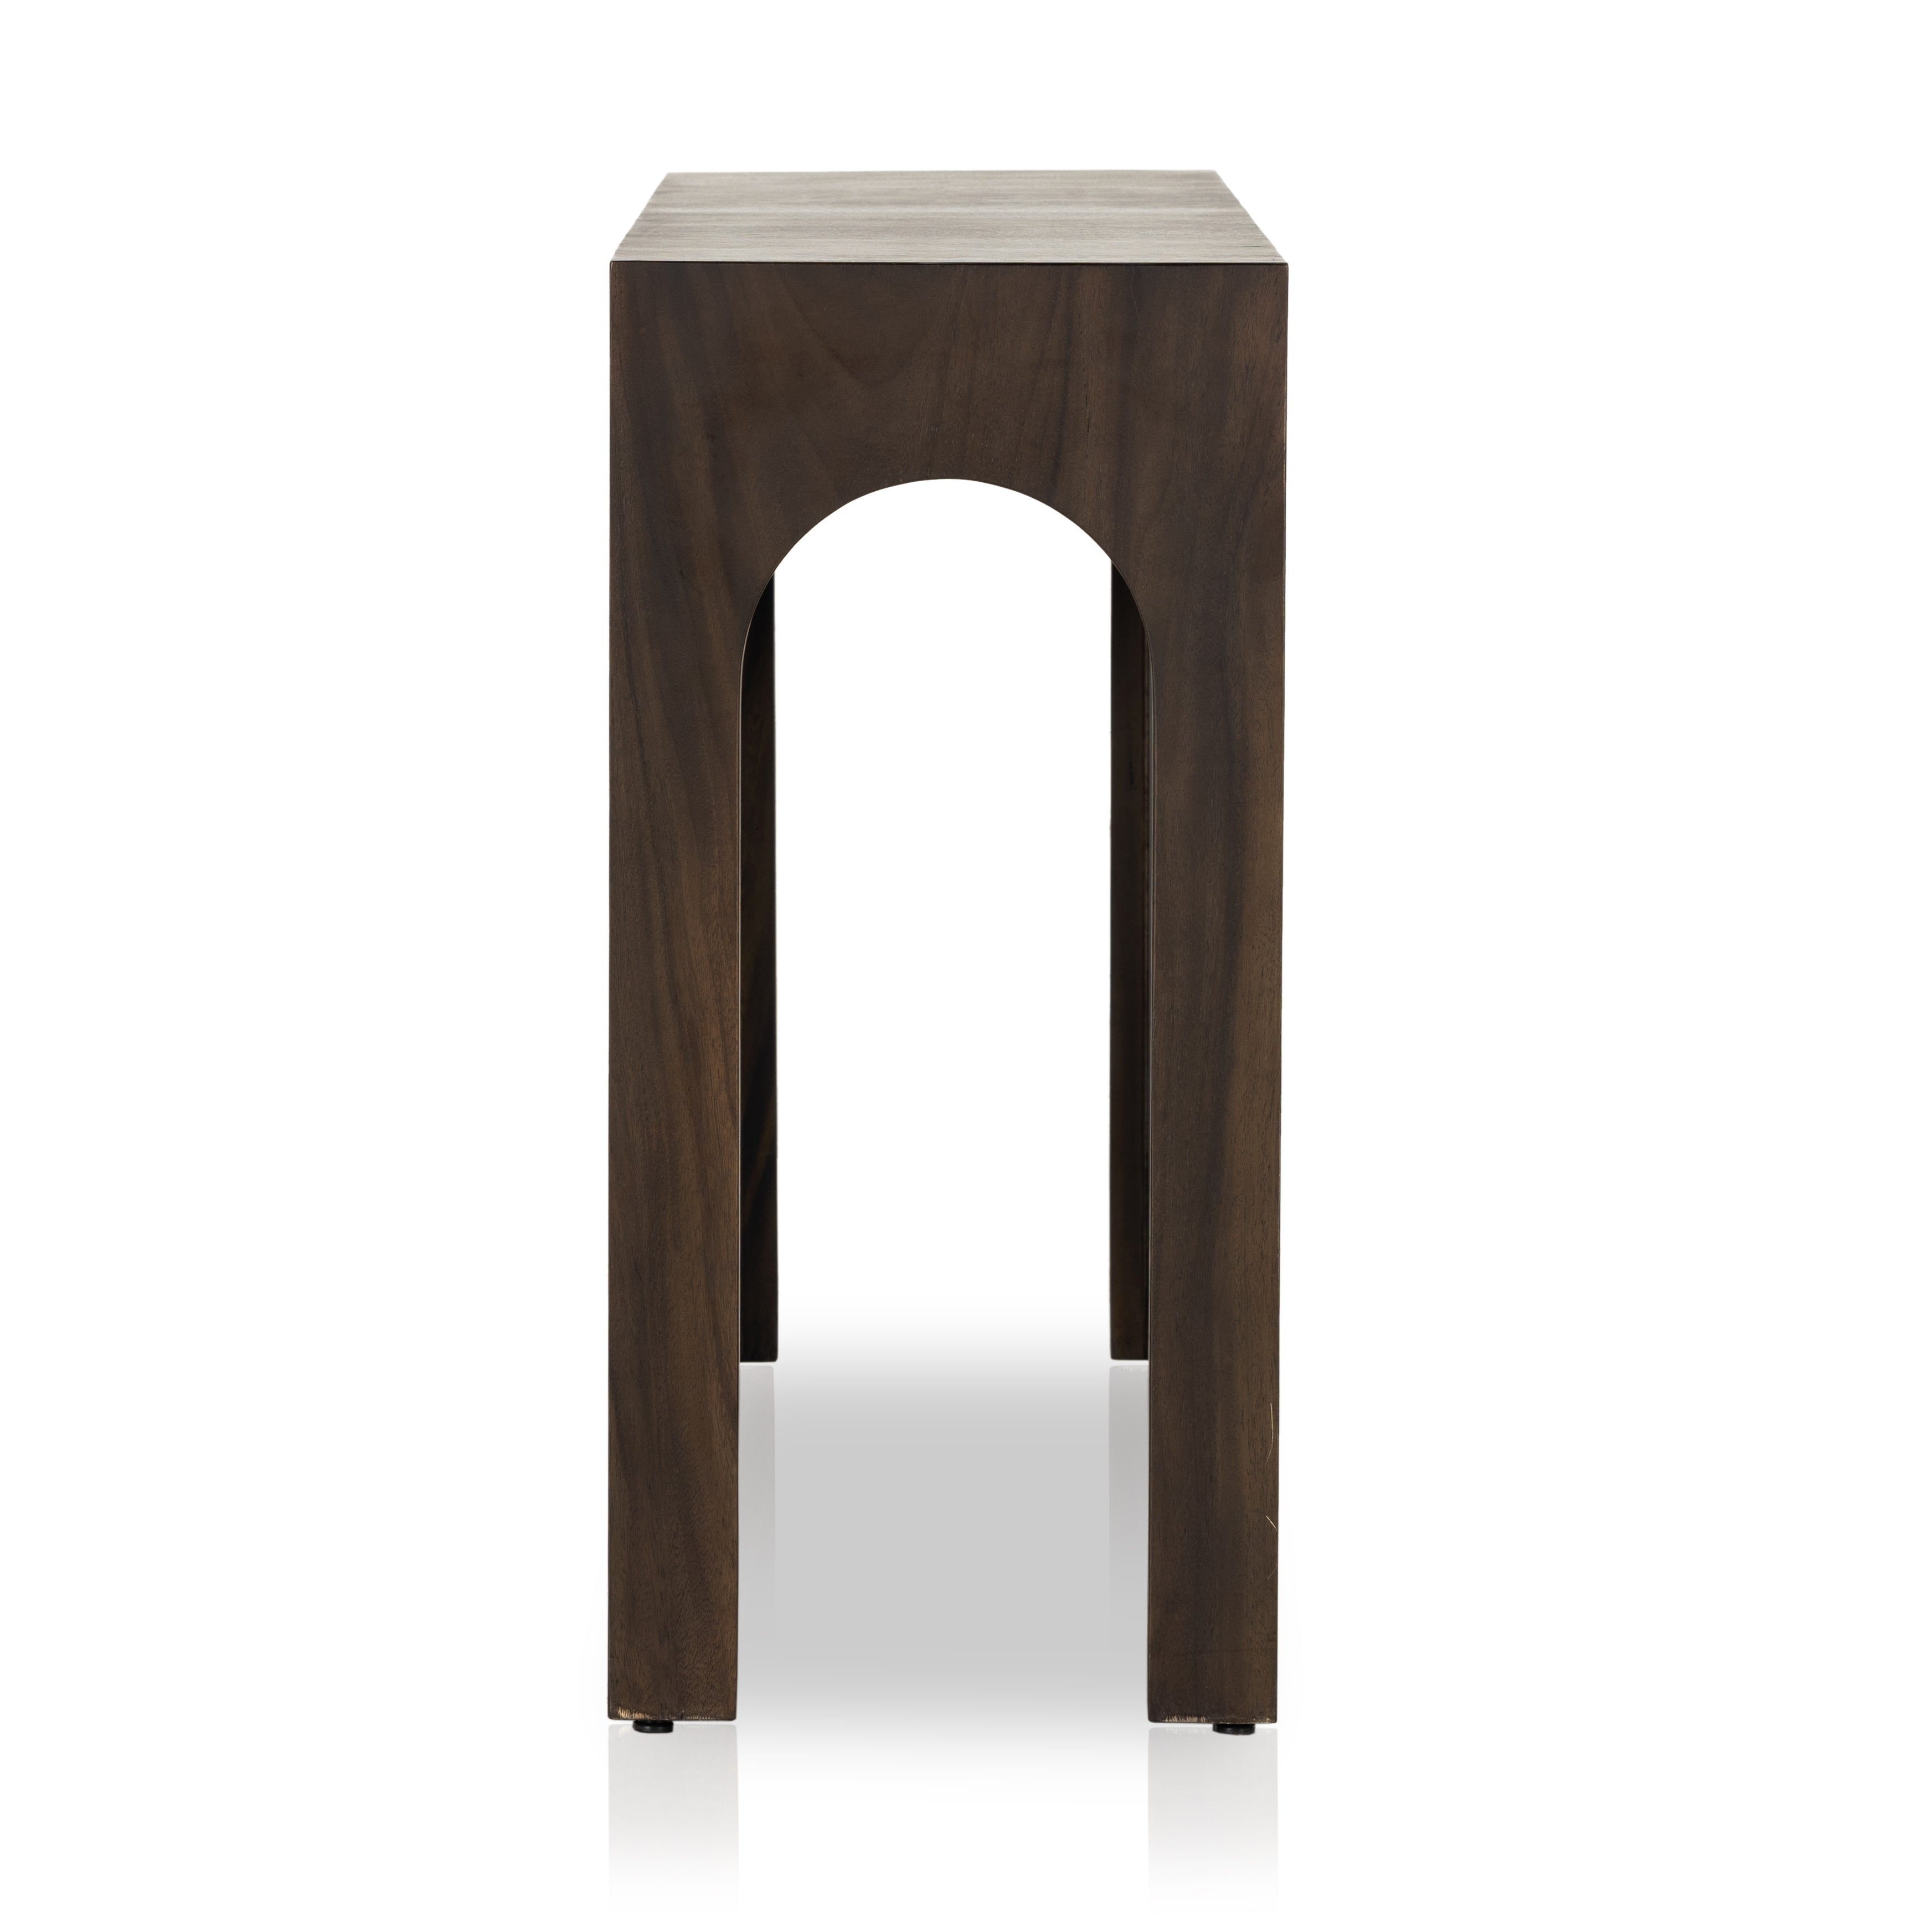 Clean and simple, with great impact. Made from smoked Guanacaste, shapely arches and block corners speak to the architectural inspiration behind this eye-catching console table. Amethyst Home provides interior design, new construction, custom furniture, and area rugs in the San Diego metro area.